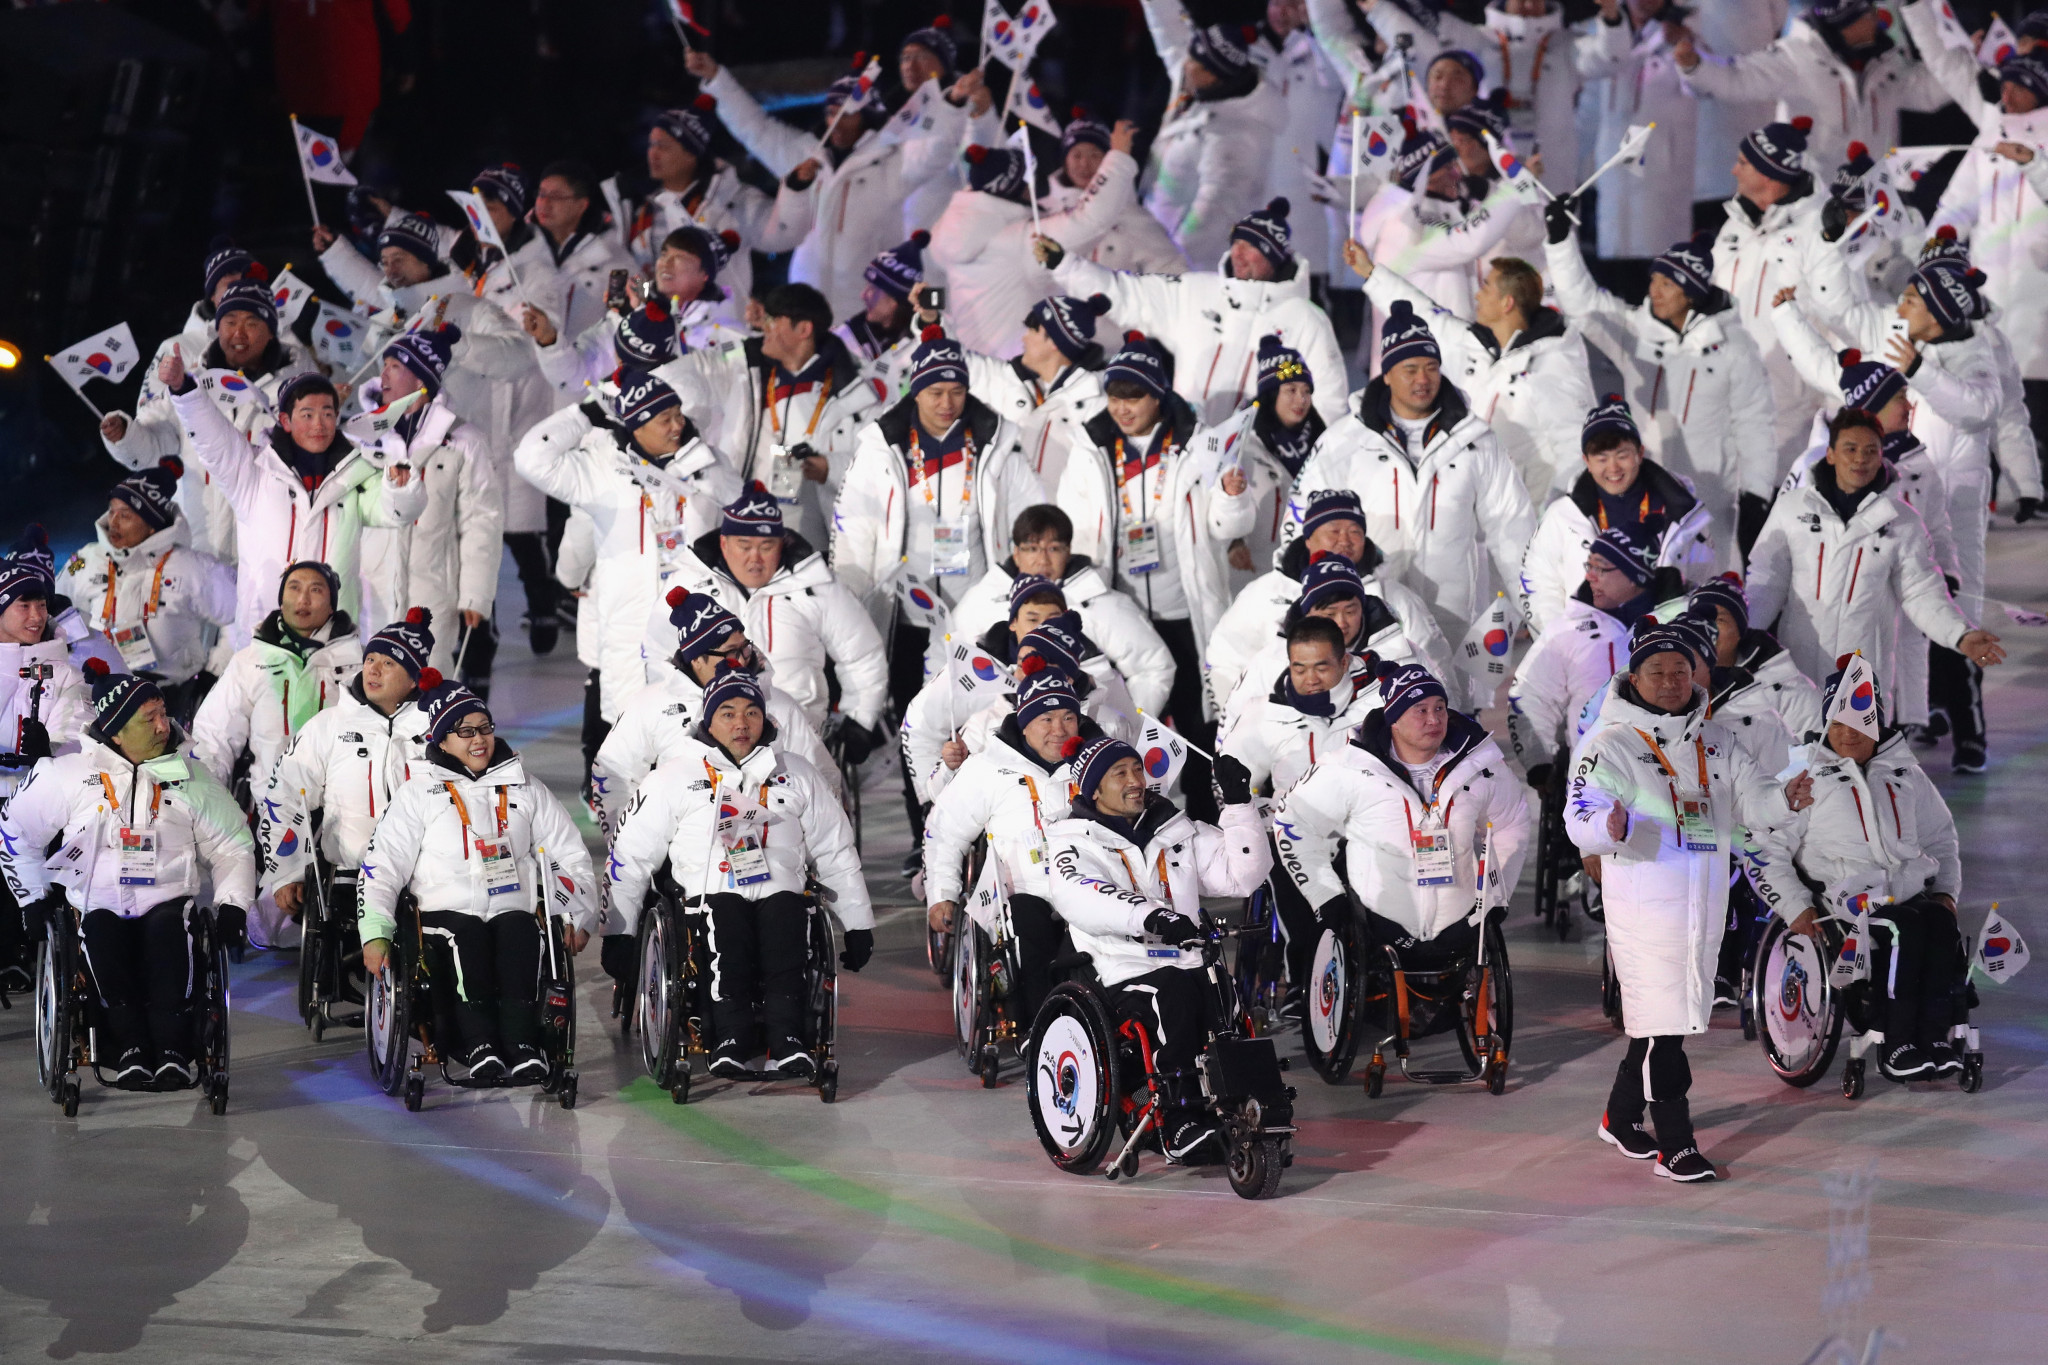 Hosts South Korea were given a warm welcome by the crowd on a cold evening at the Pyeongchang Olympic Stadium ©Getty Images